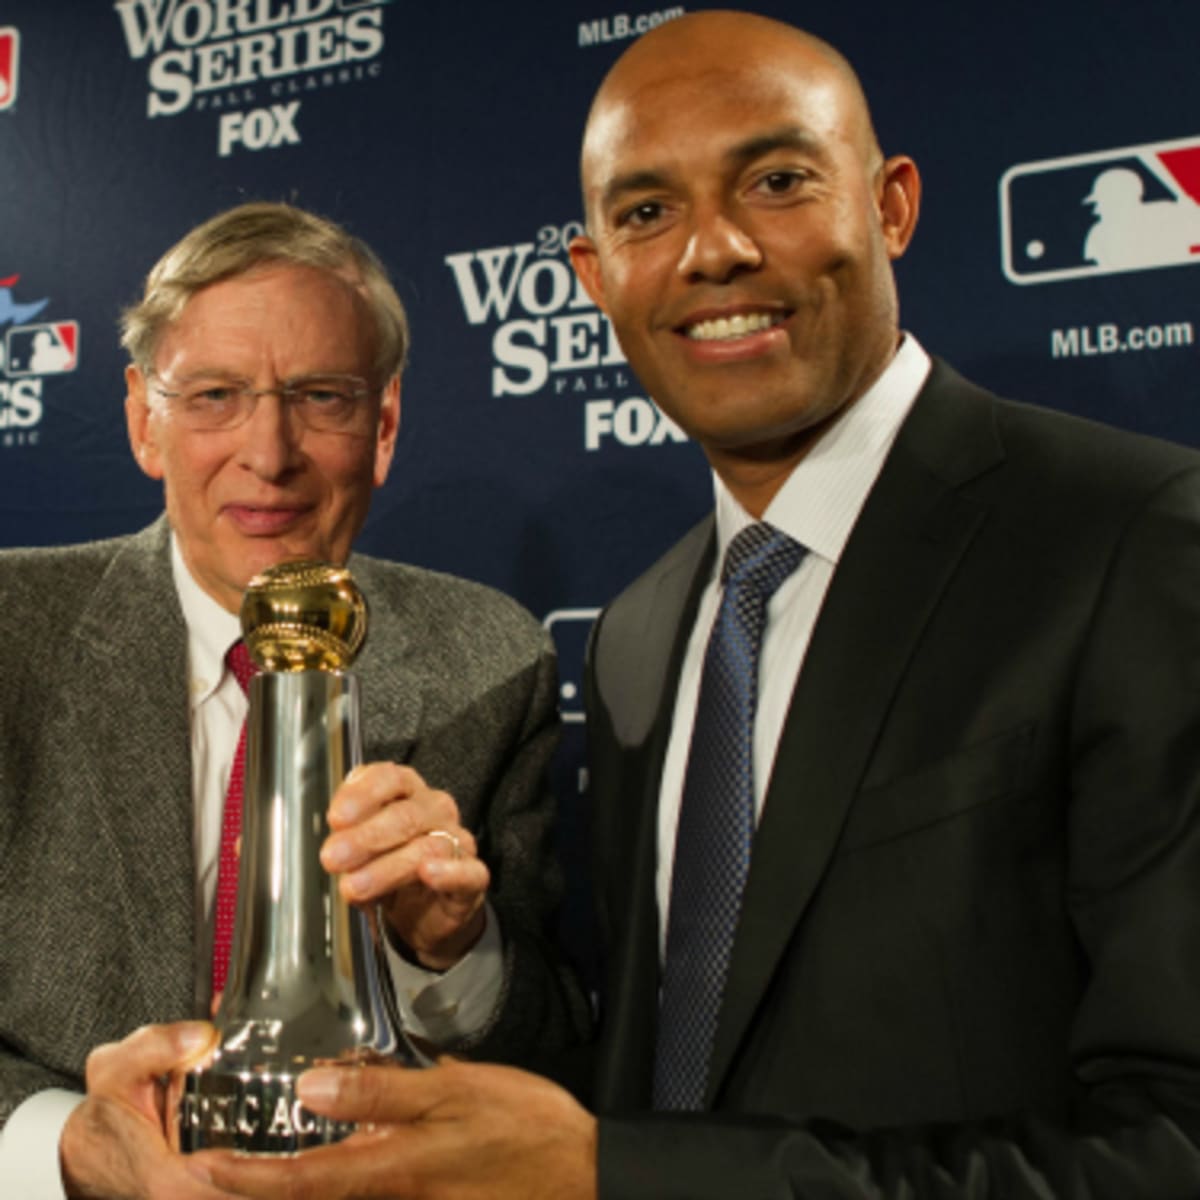 Bud Selig to give Mariano Rivera Historic Achievement Award before